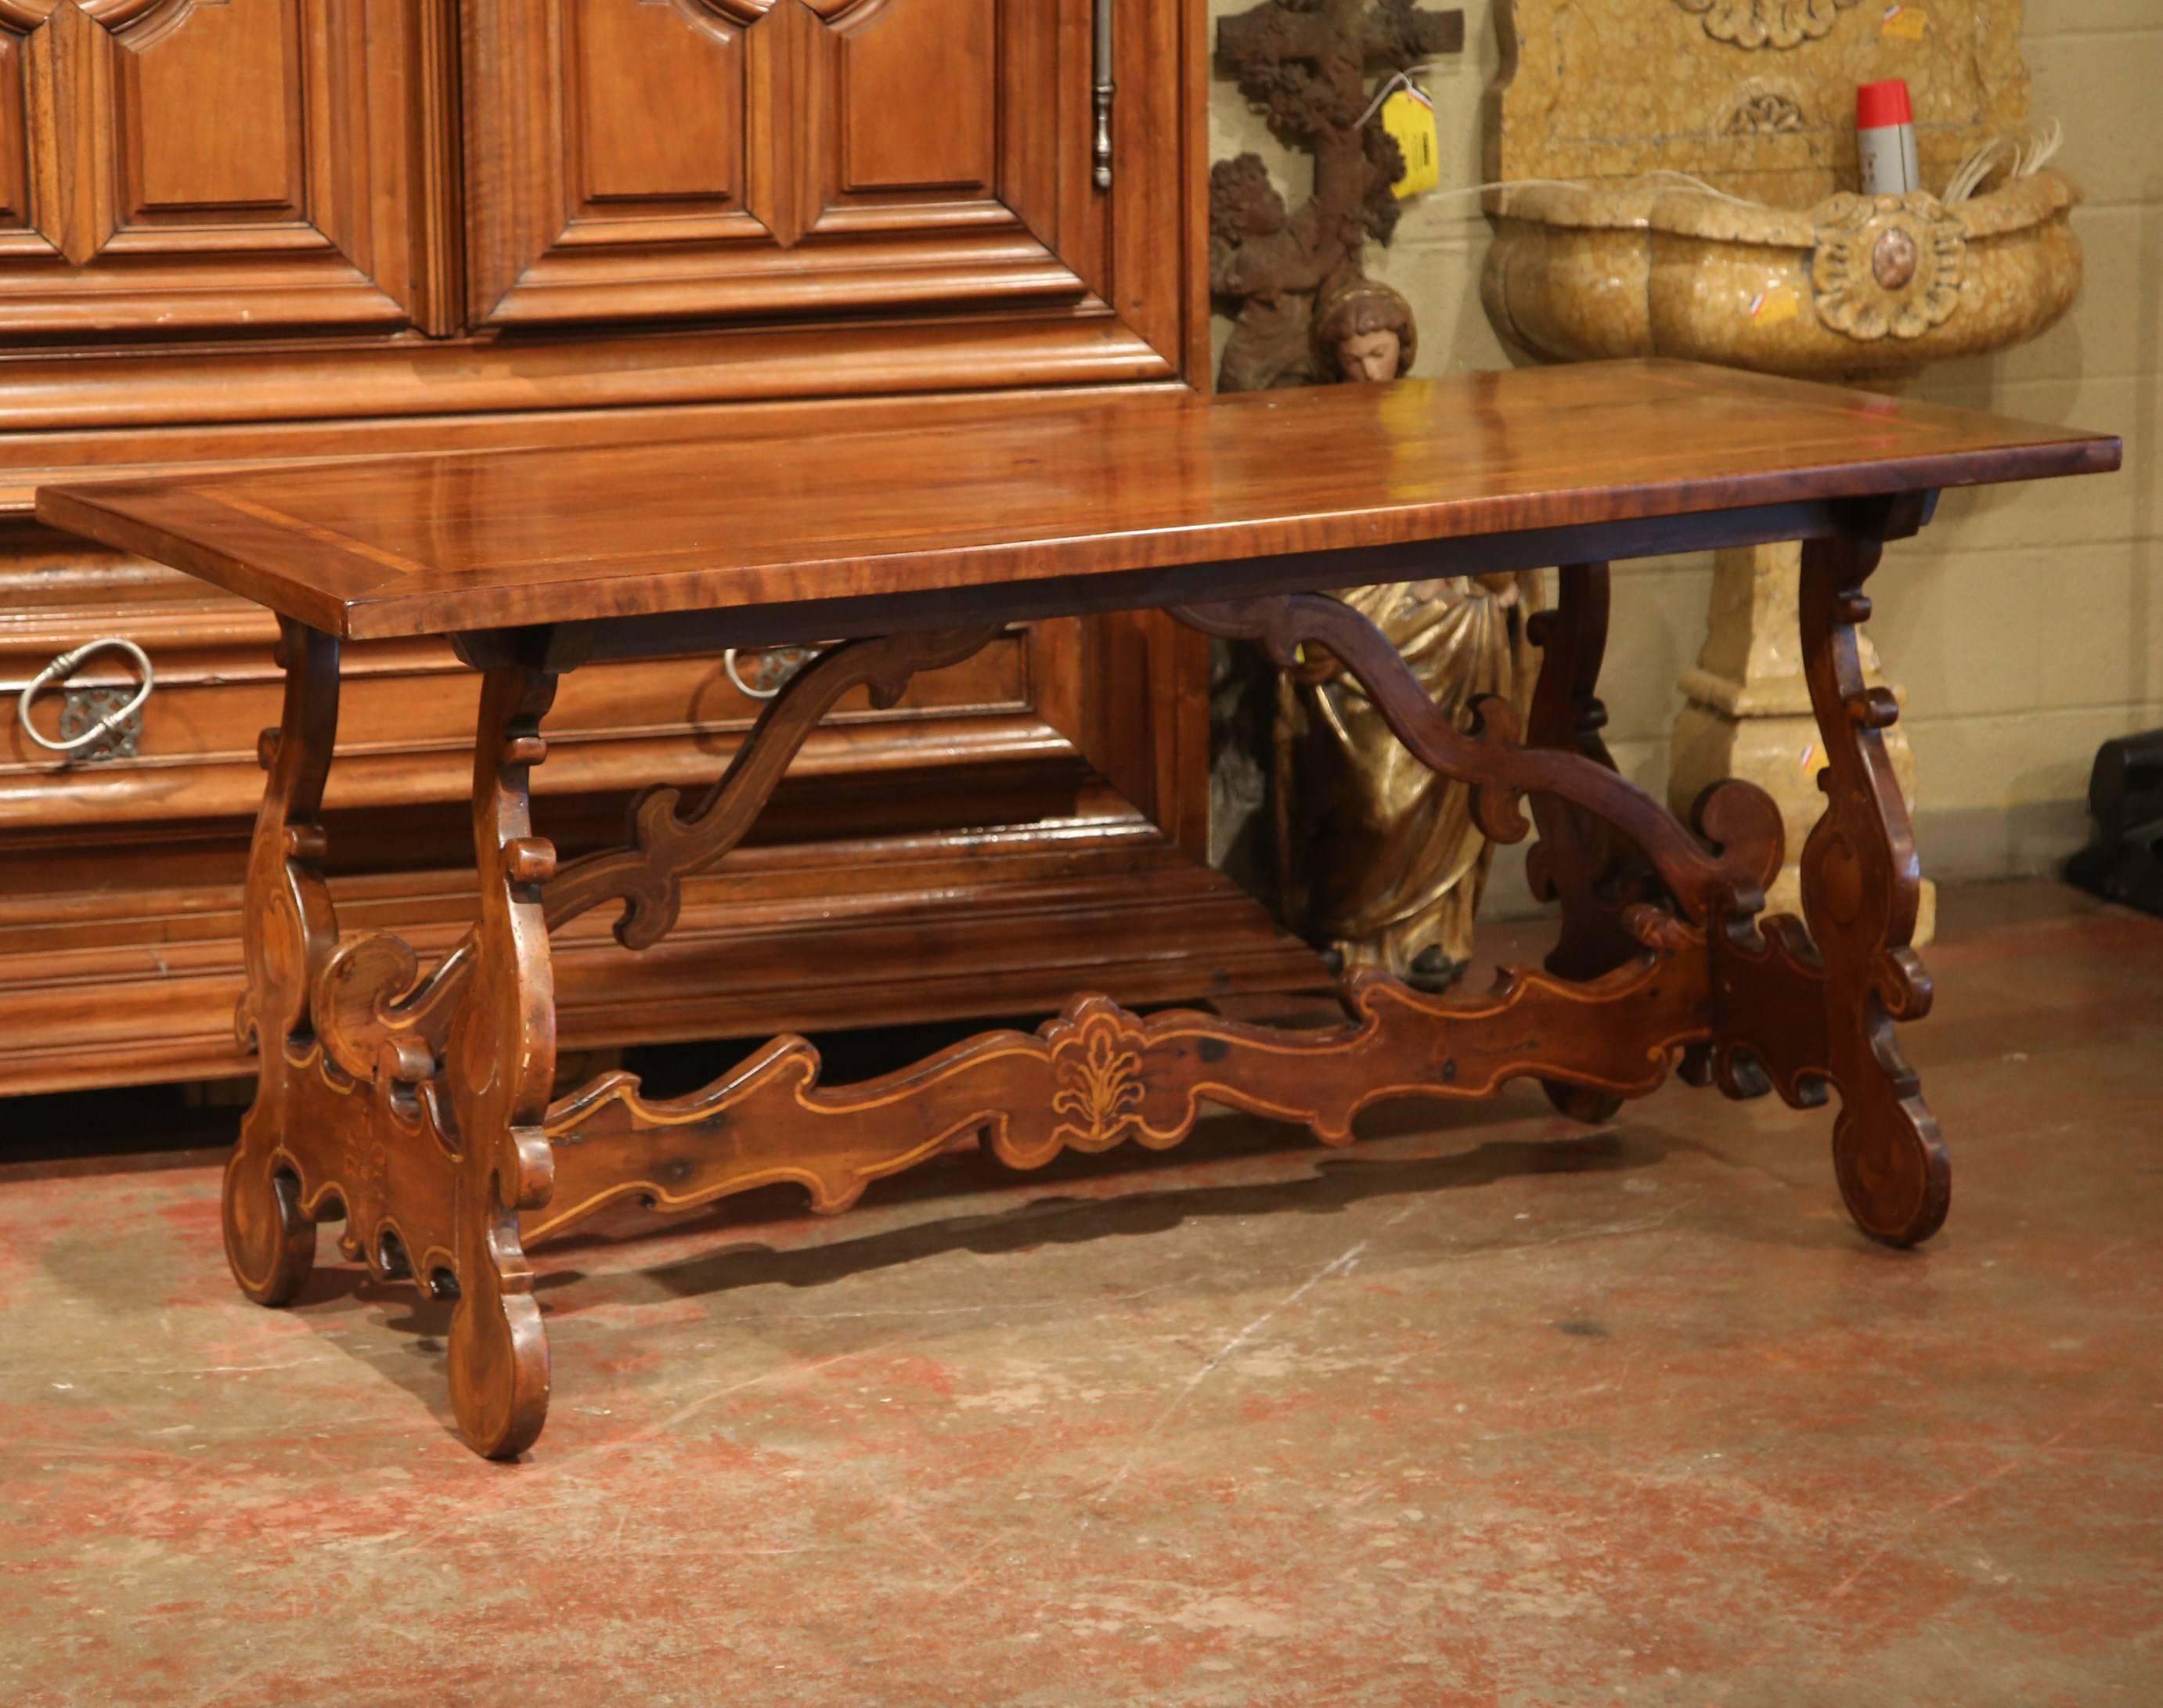 This elegant, antique fruit wood dining room table was crafted in Italy, circa 1830. The intricate table features a solid top made from a single walnut plank and embellished with a decorative inlay cherry band around the perimeter. The base has two